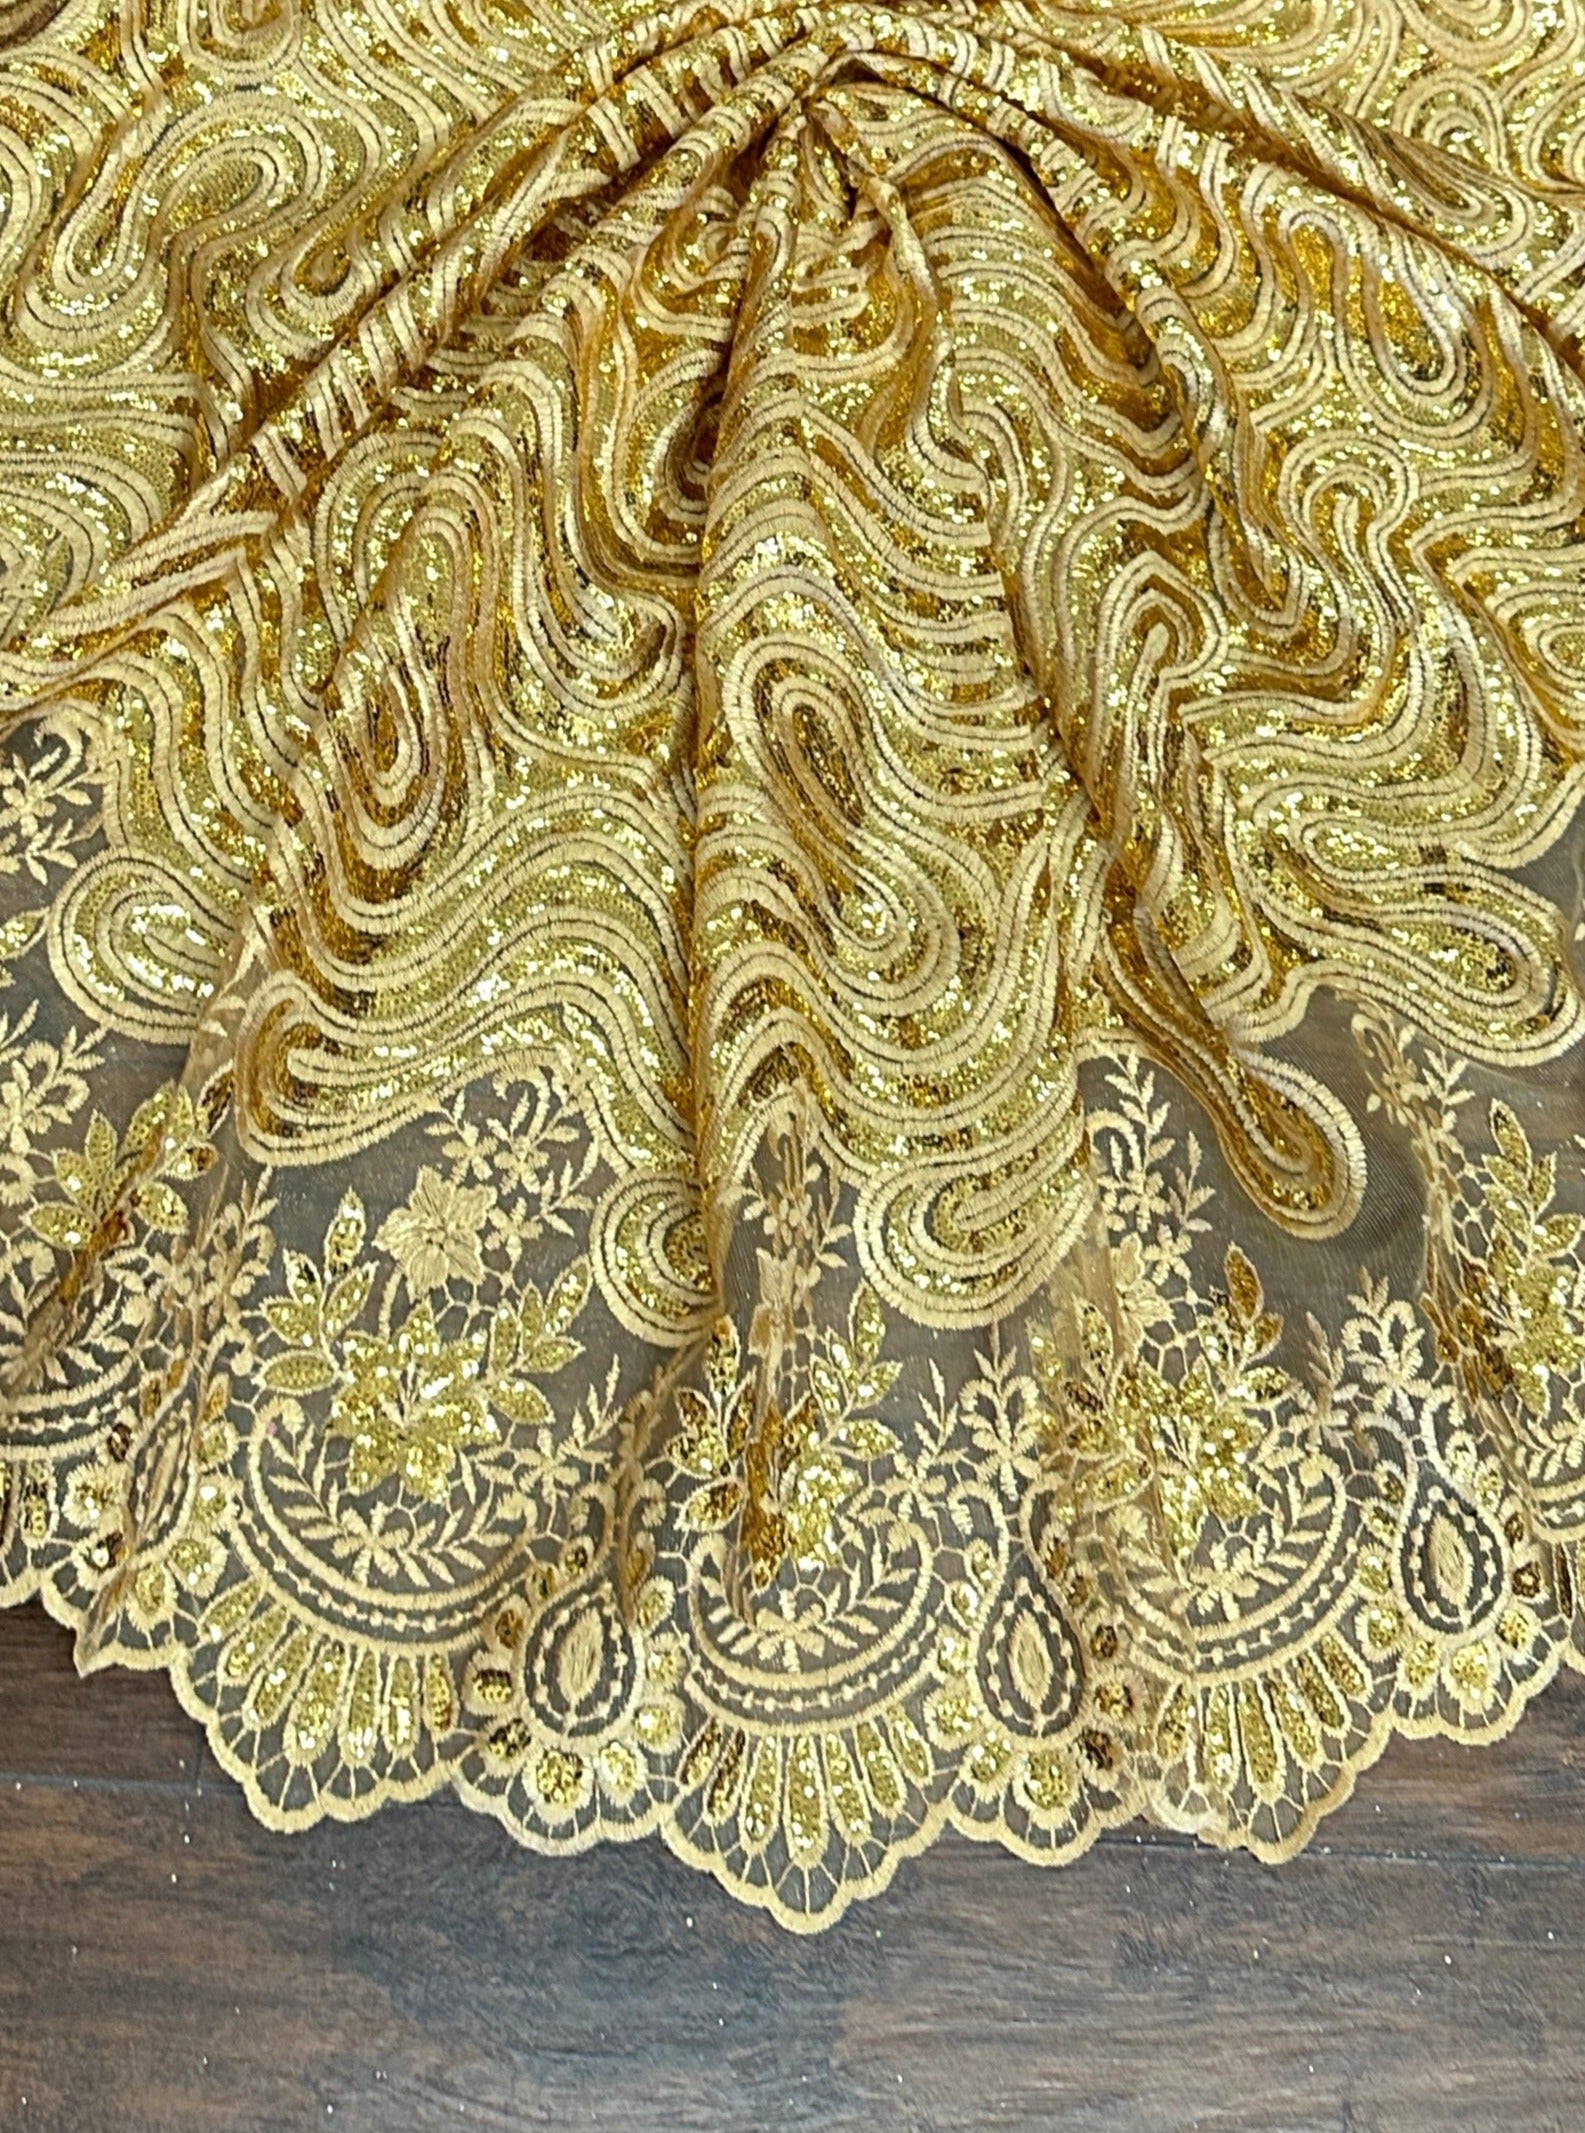 bridal lace fabric cheap, gold lace, Gold Sequin Embroidered Lace, bridal lace, lace fabric for prom dress, border lace fabric, gown lace fabric, luxury lace, lace fabric, glitter lace, buy lace online, discounted embriodered lace